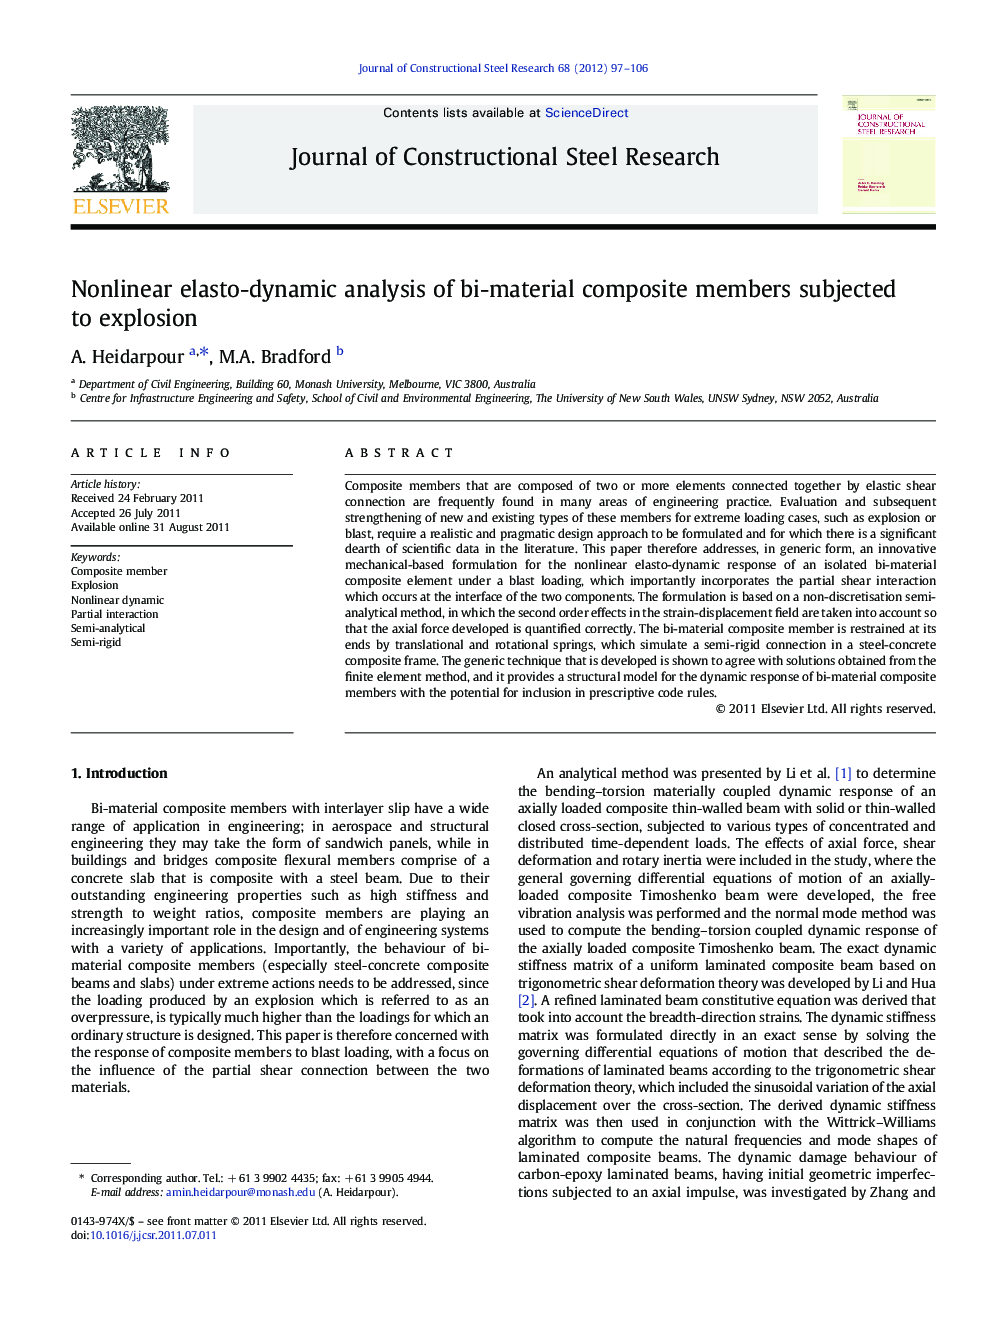 Nonlinear elasto-dynamic analysis of bi-material composite members subjected to explosion